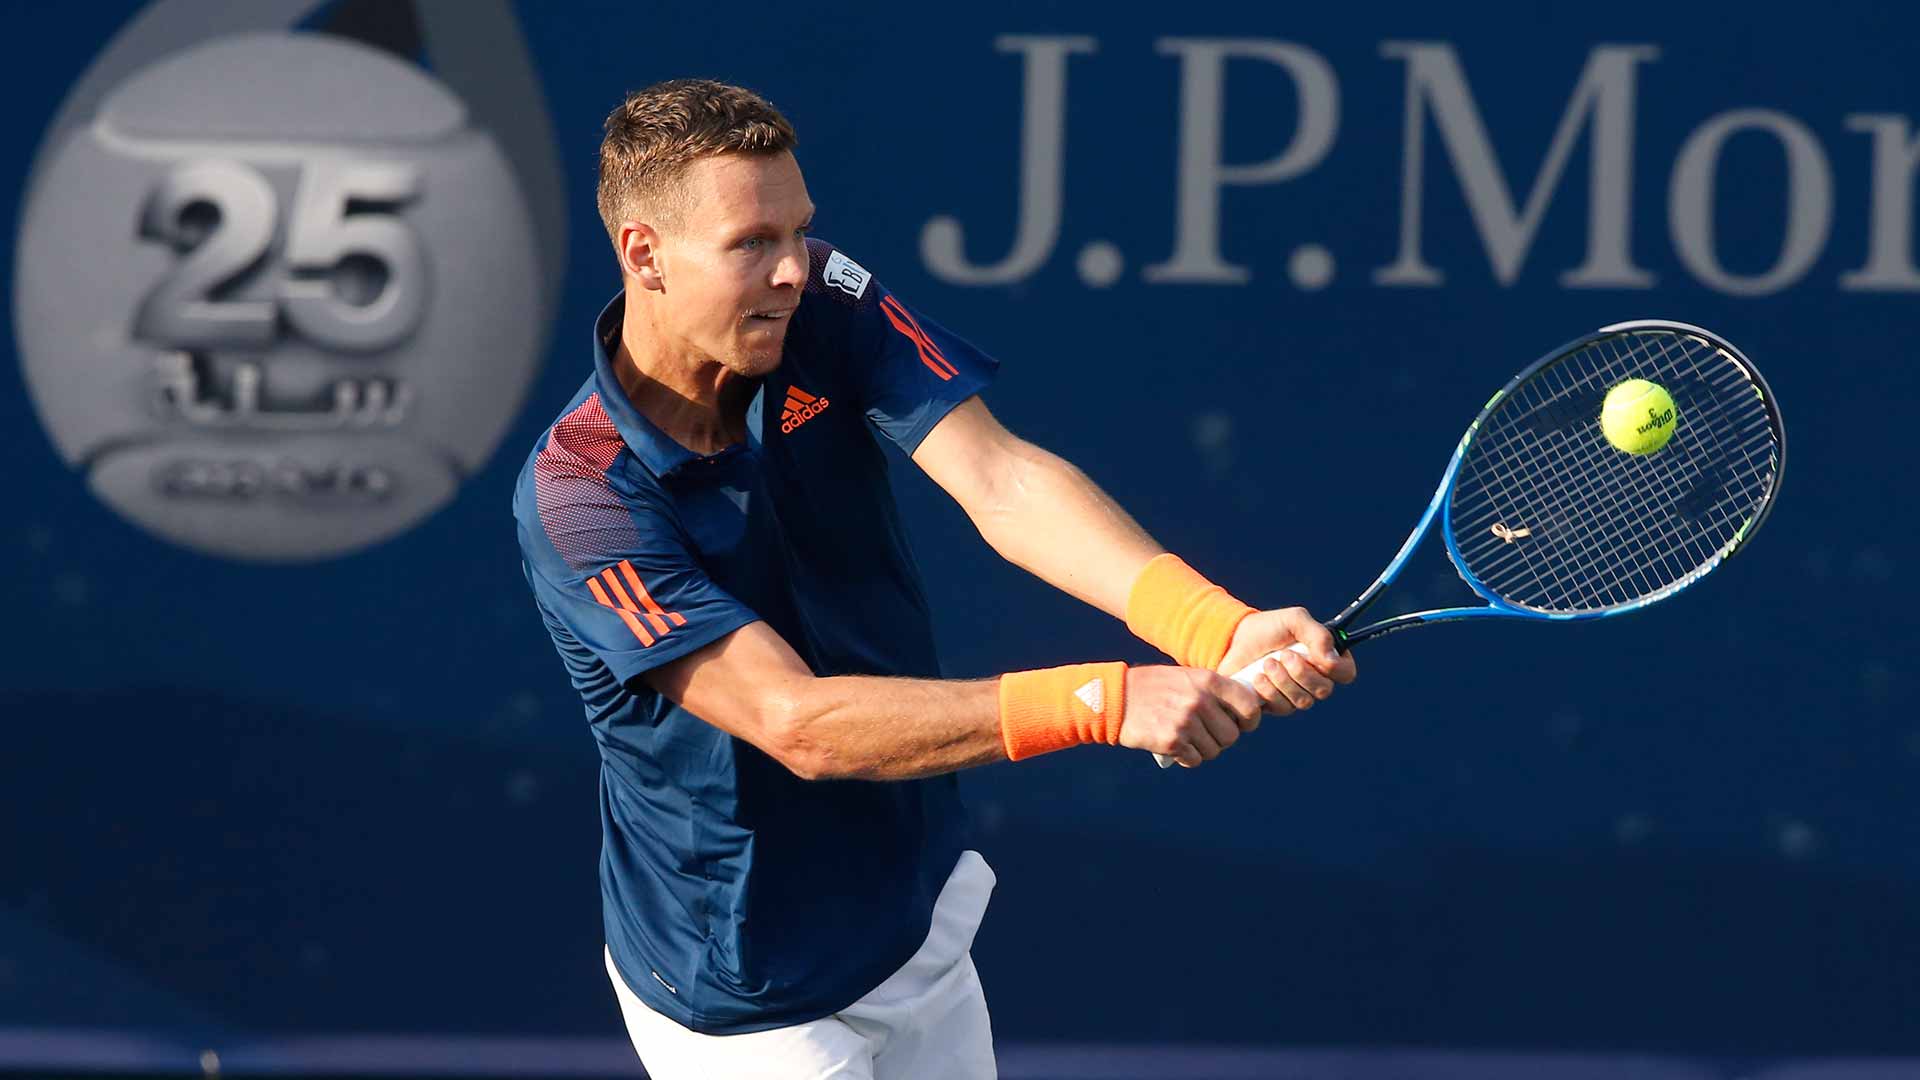 Tomas Berdych vs Fabio Fognini (BETTING TIPS, Match Preview & Expert Analysis )™